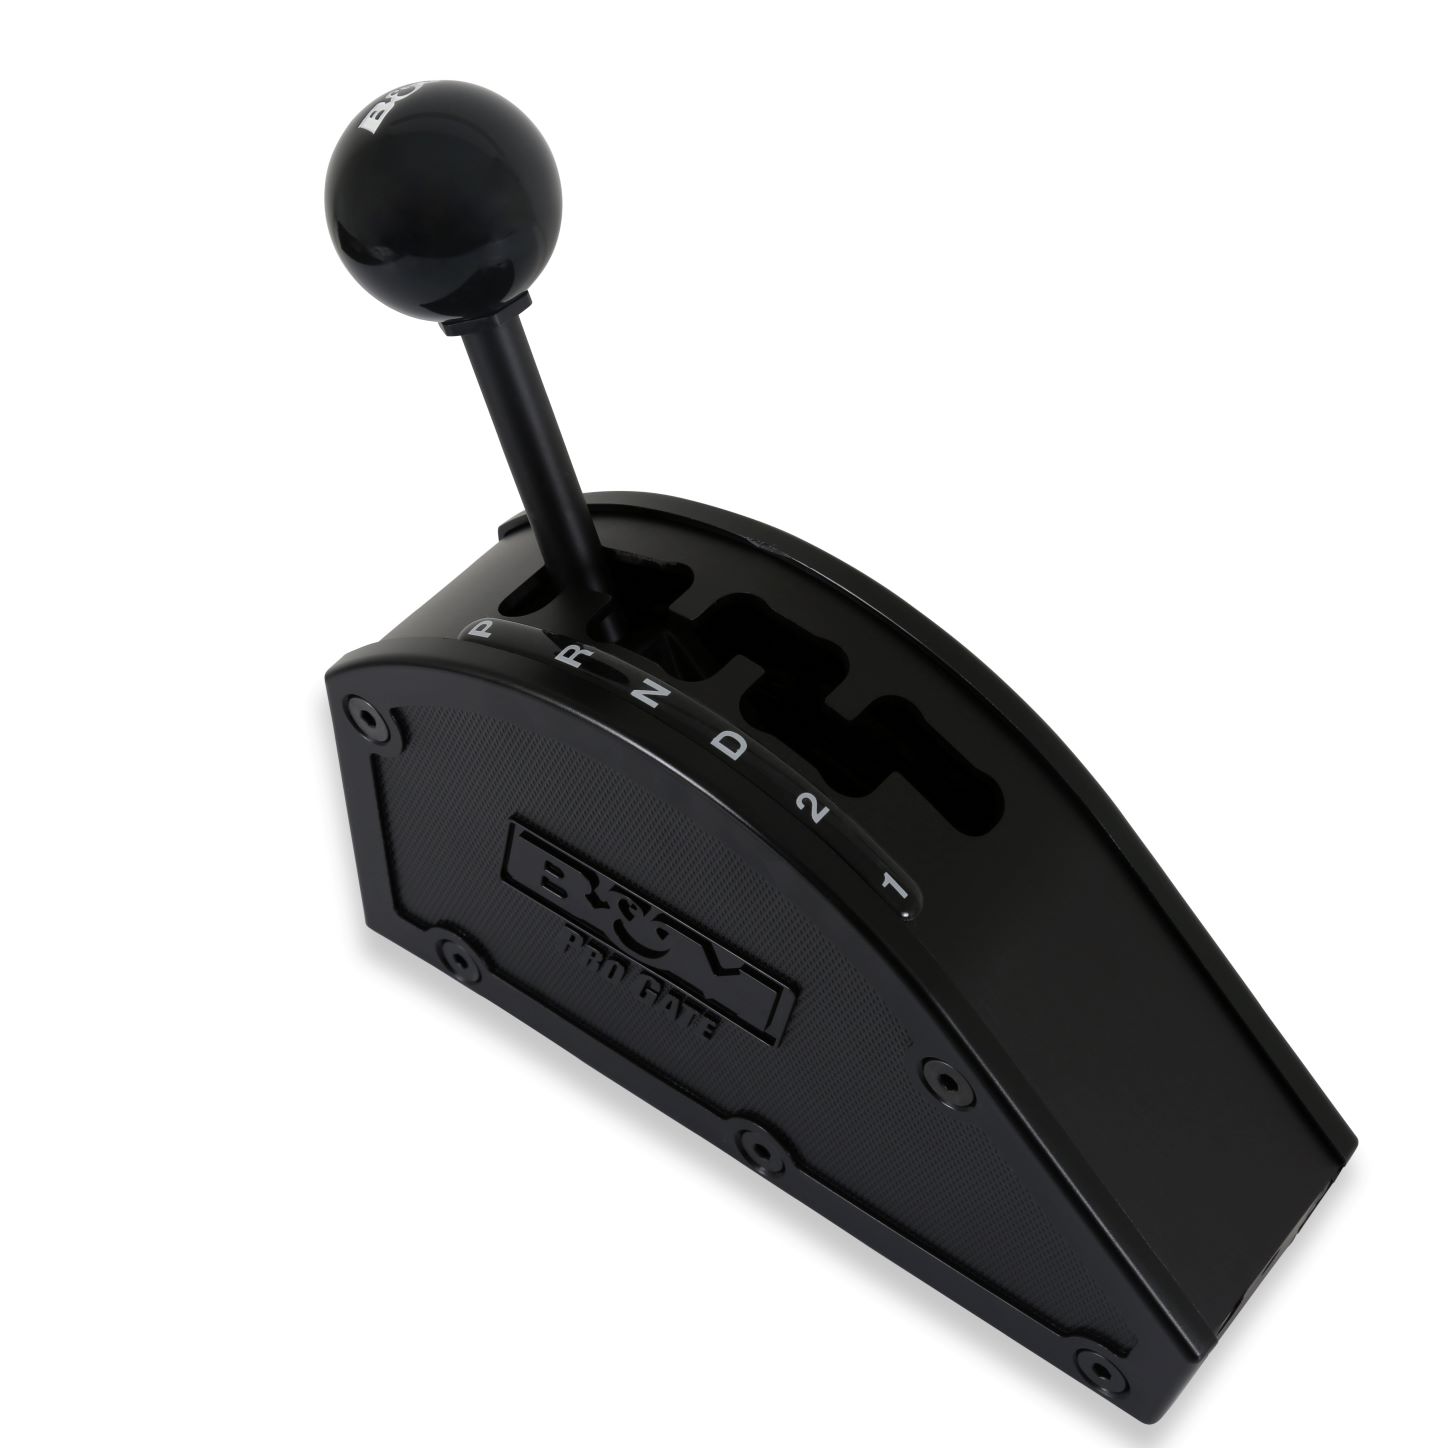 New Product: B&M Pro Gate Shifter For 3- and 4-Speed Chrysler and Ford Automatic Transmissions, Rear-Exit Cable, Forward Shift Pattern